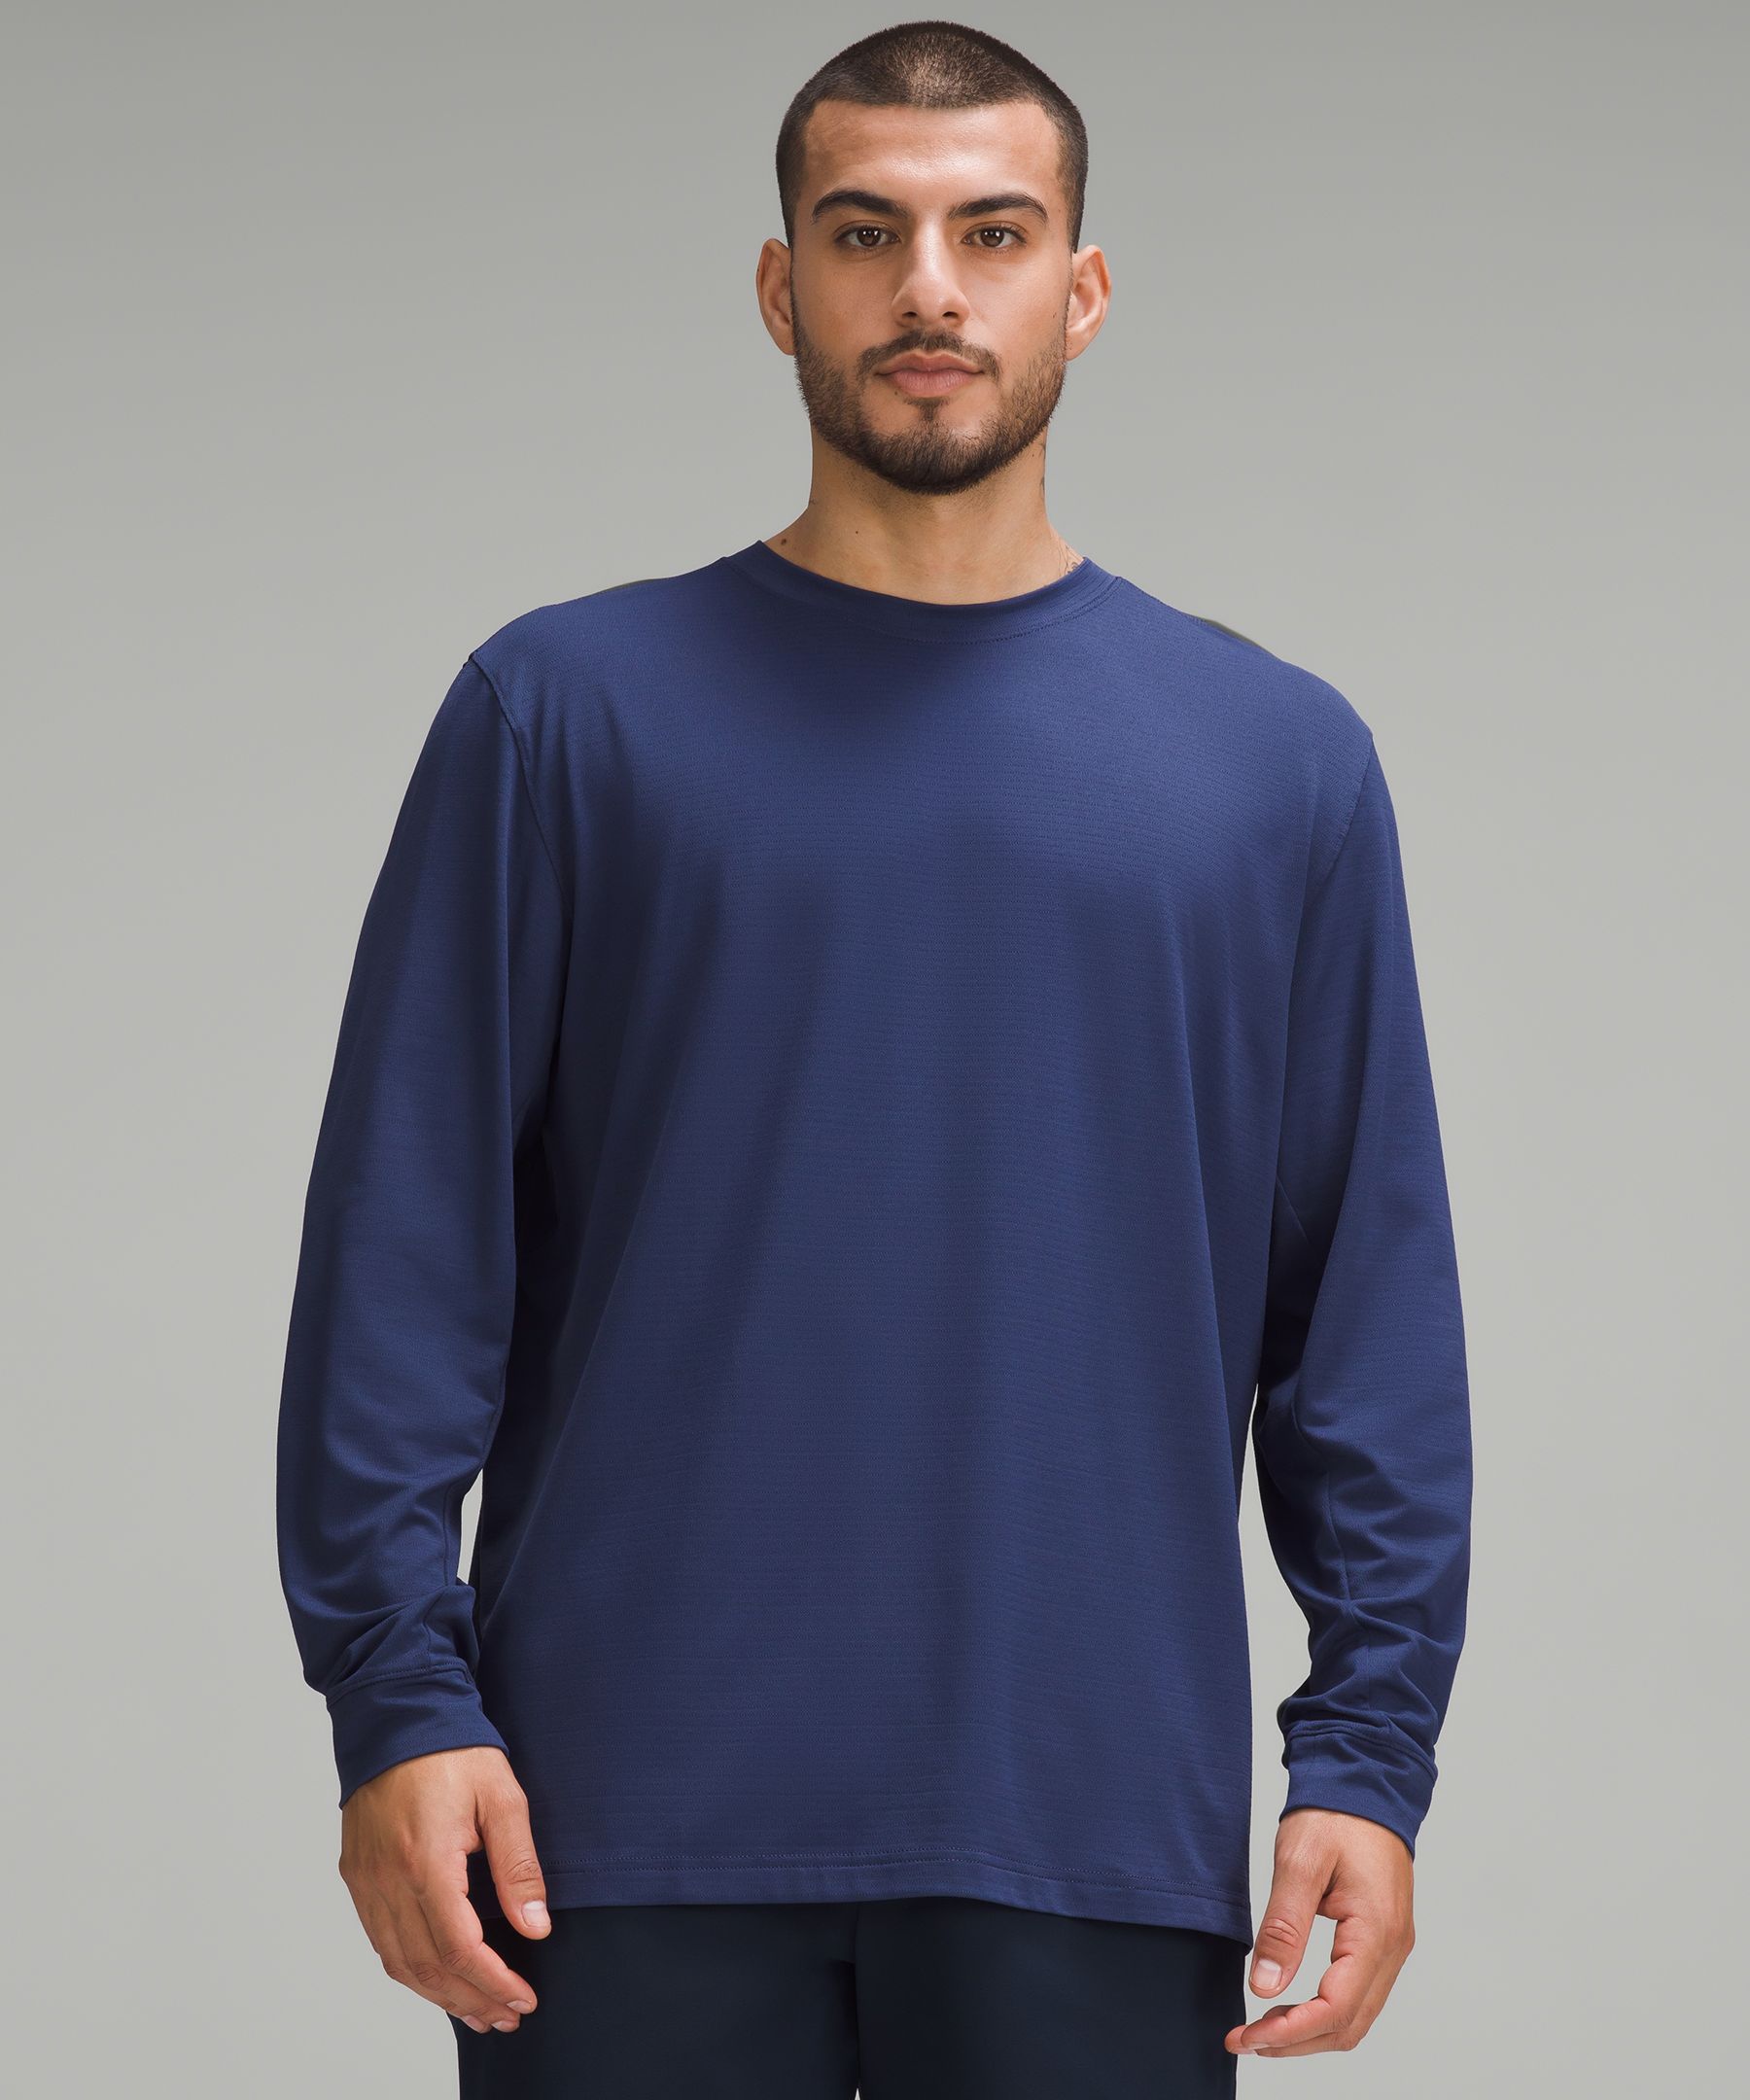 Moa Moa Seamless Long Sleeve Top at Dry Goods